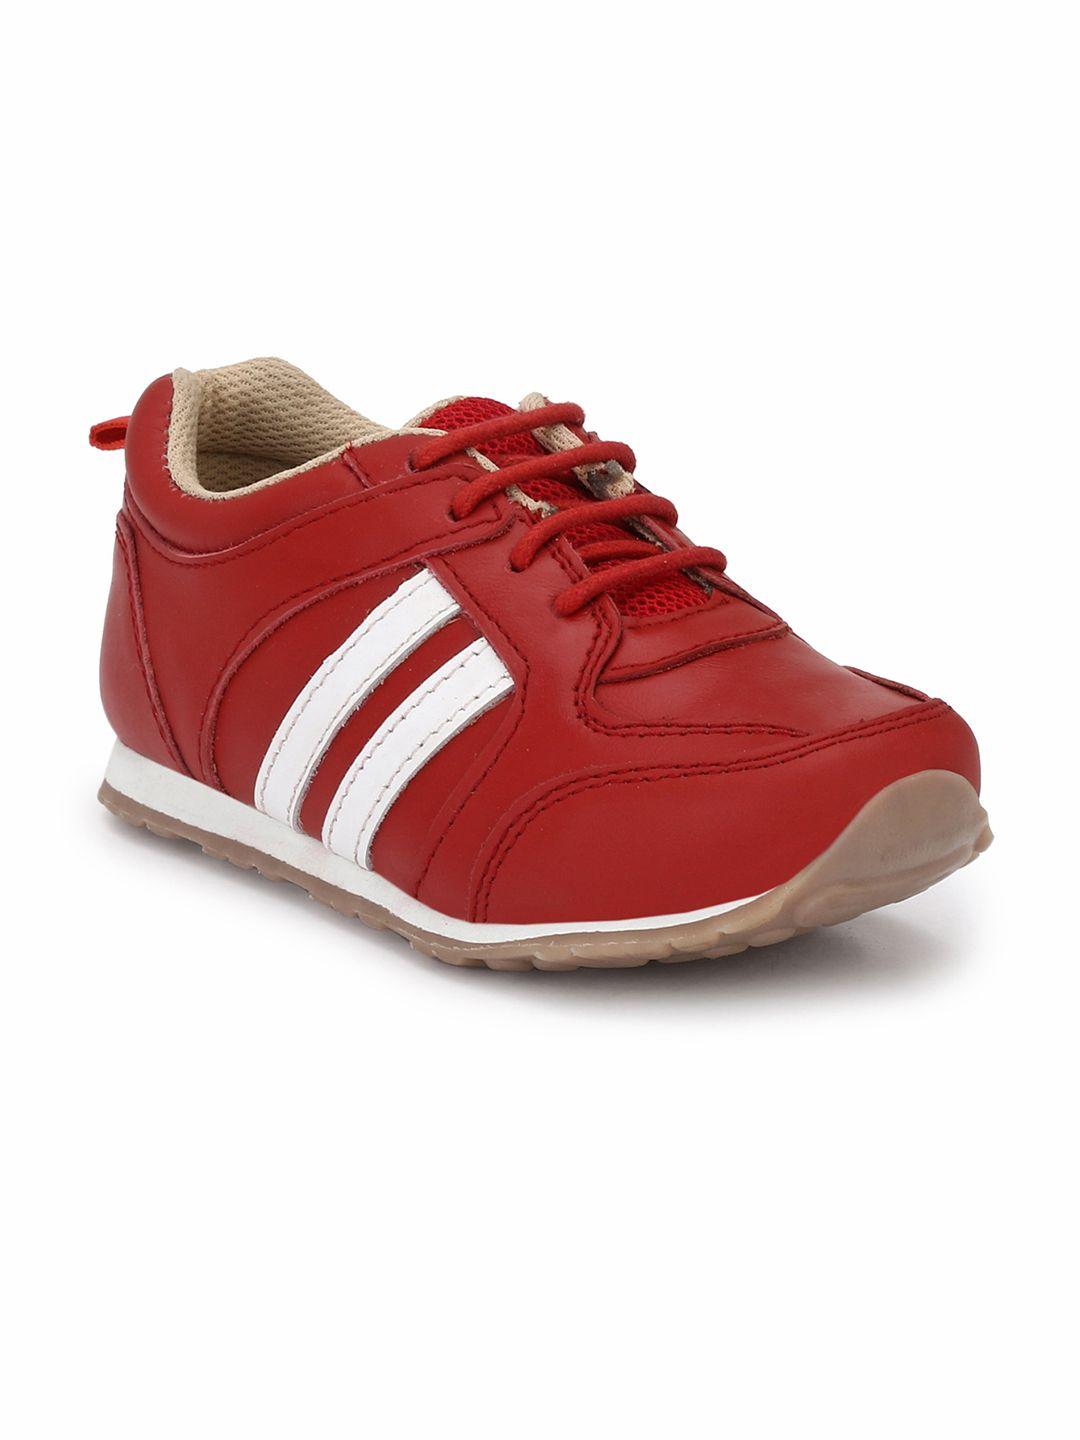 tuskey boys red sneakers